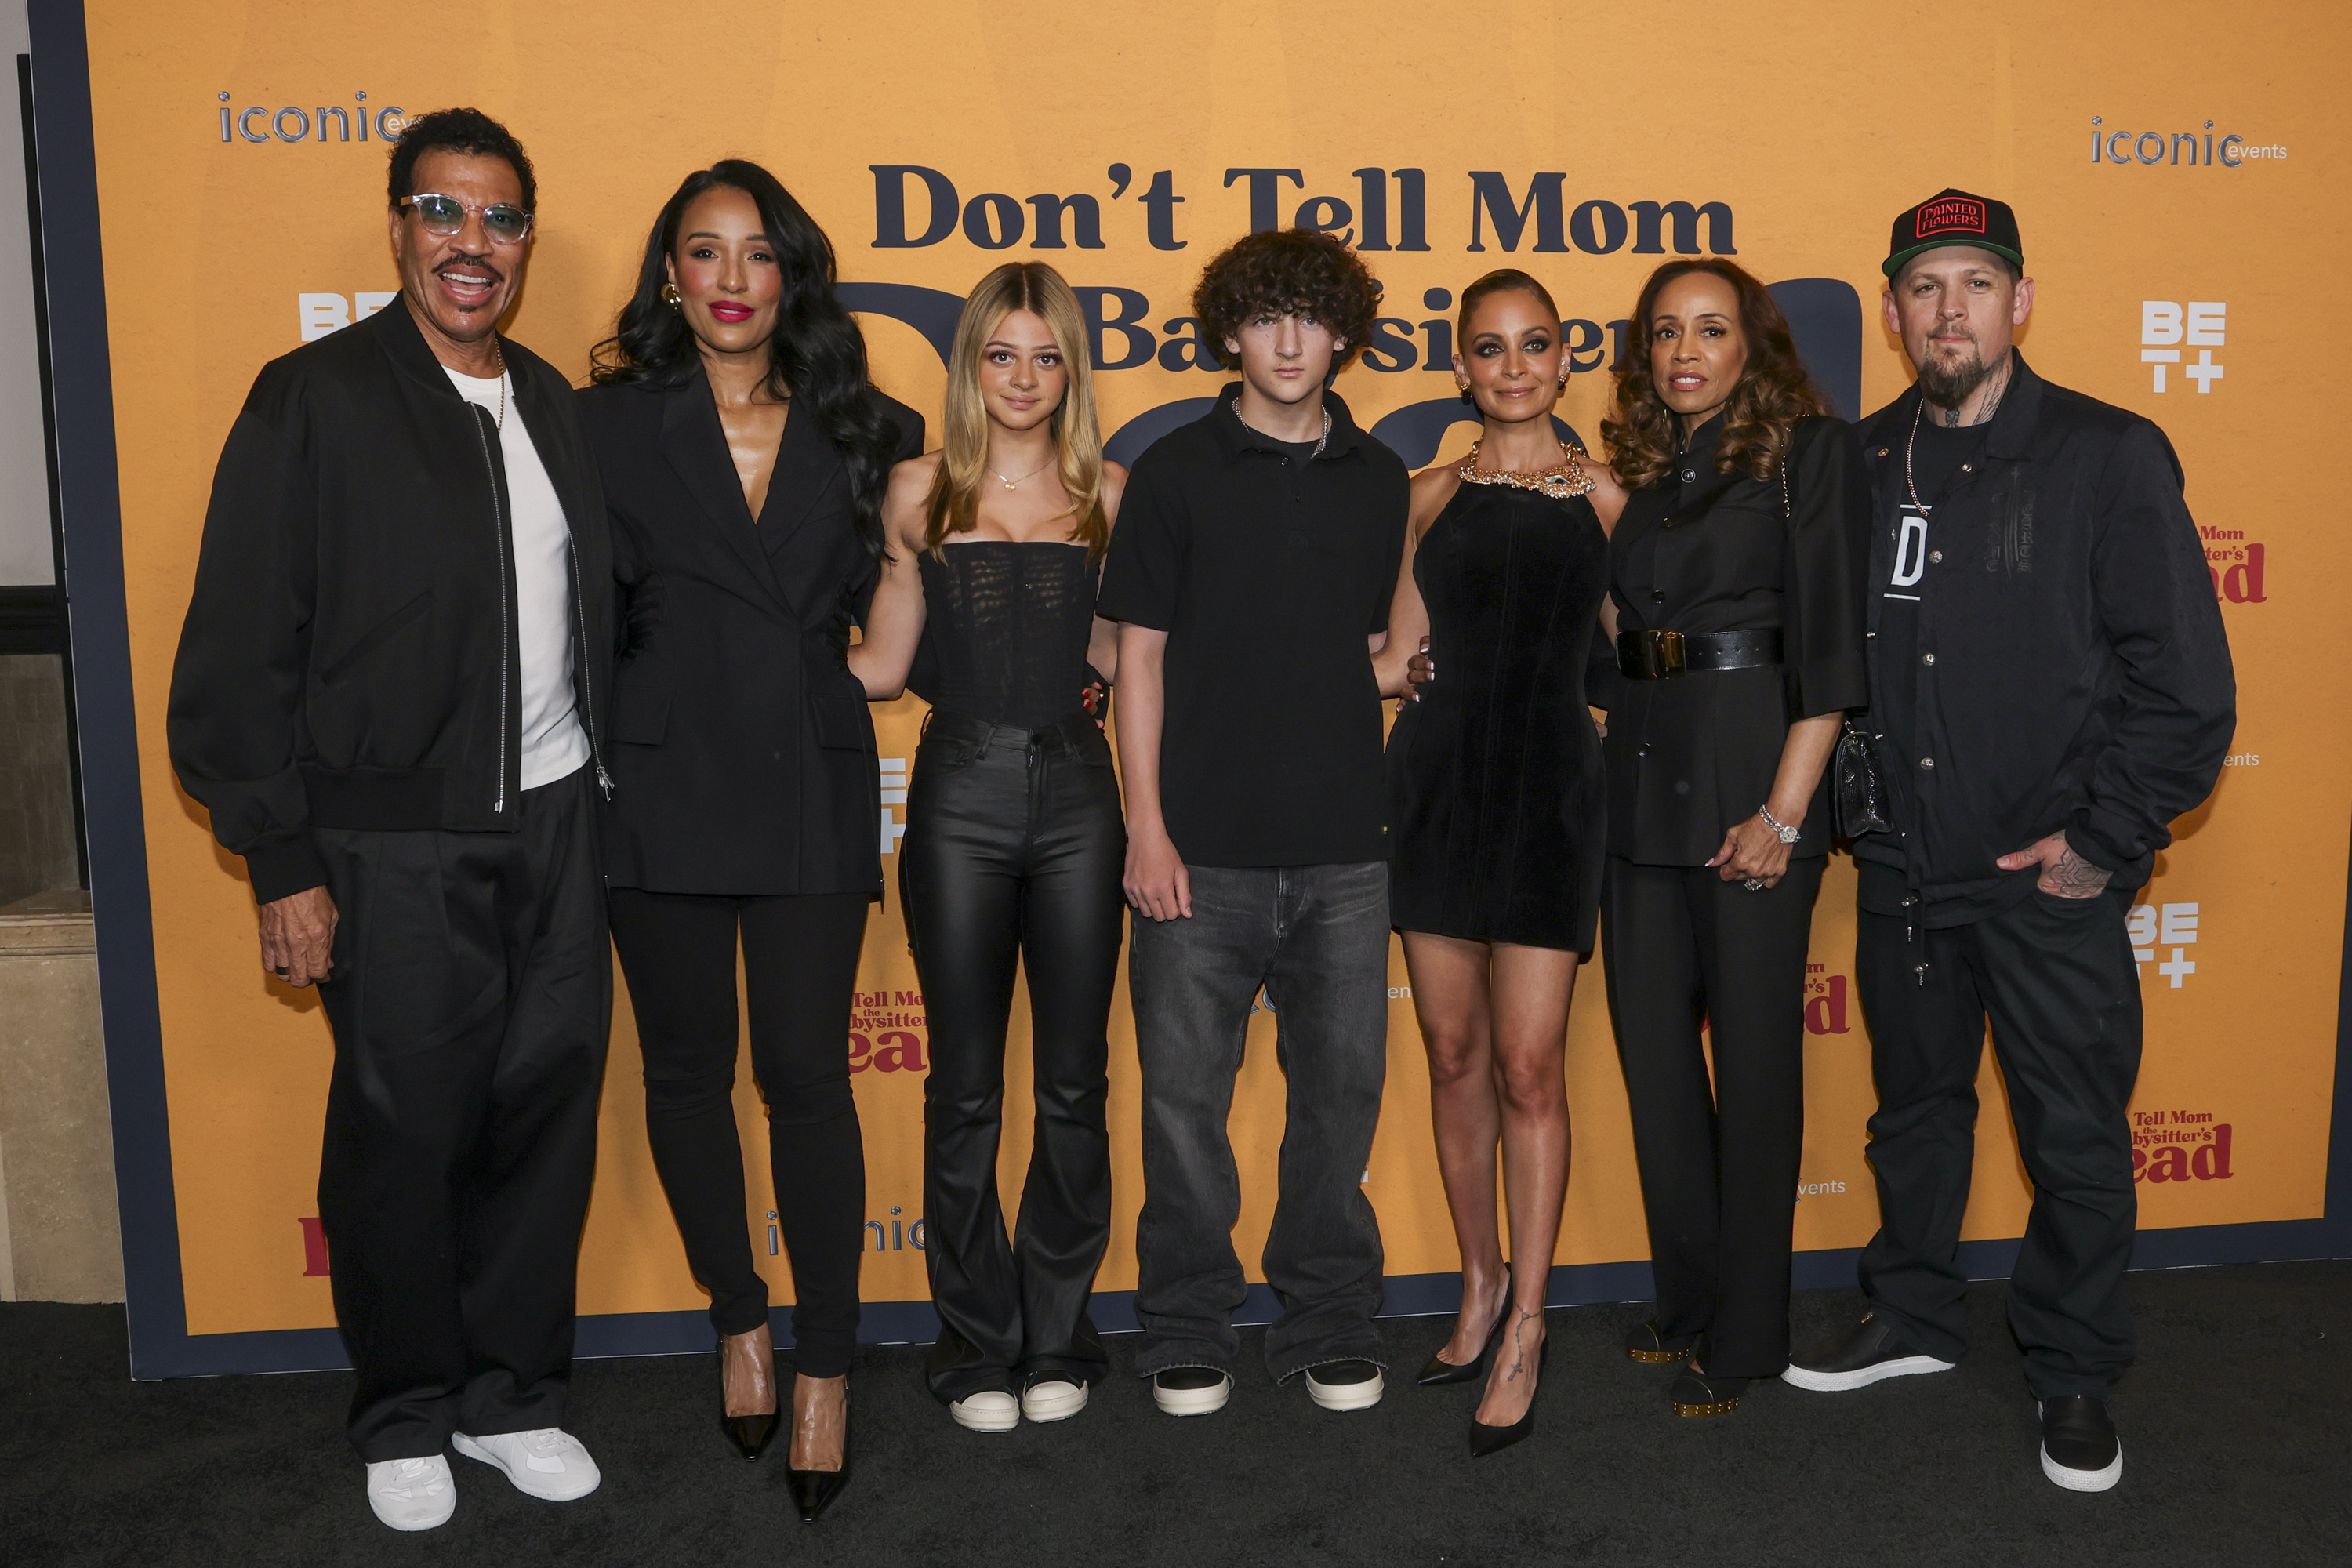 Six people posing together at the &quot;Don&#x27;t Tell Mom&quot; event; two men and four women, with a mix of casual and formal attire